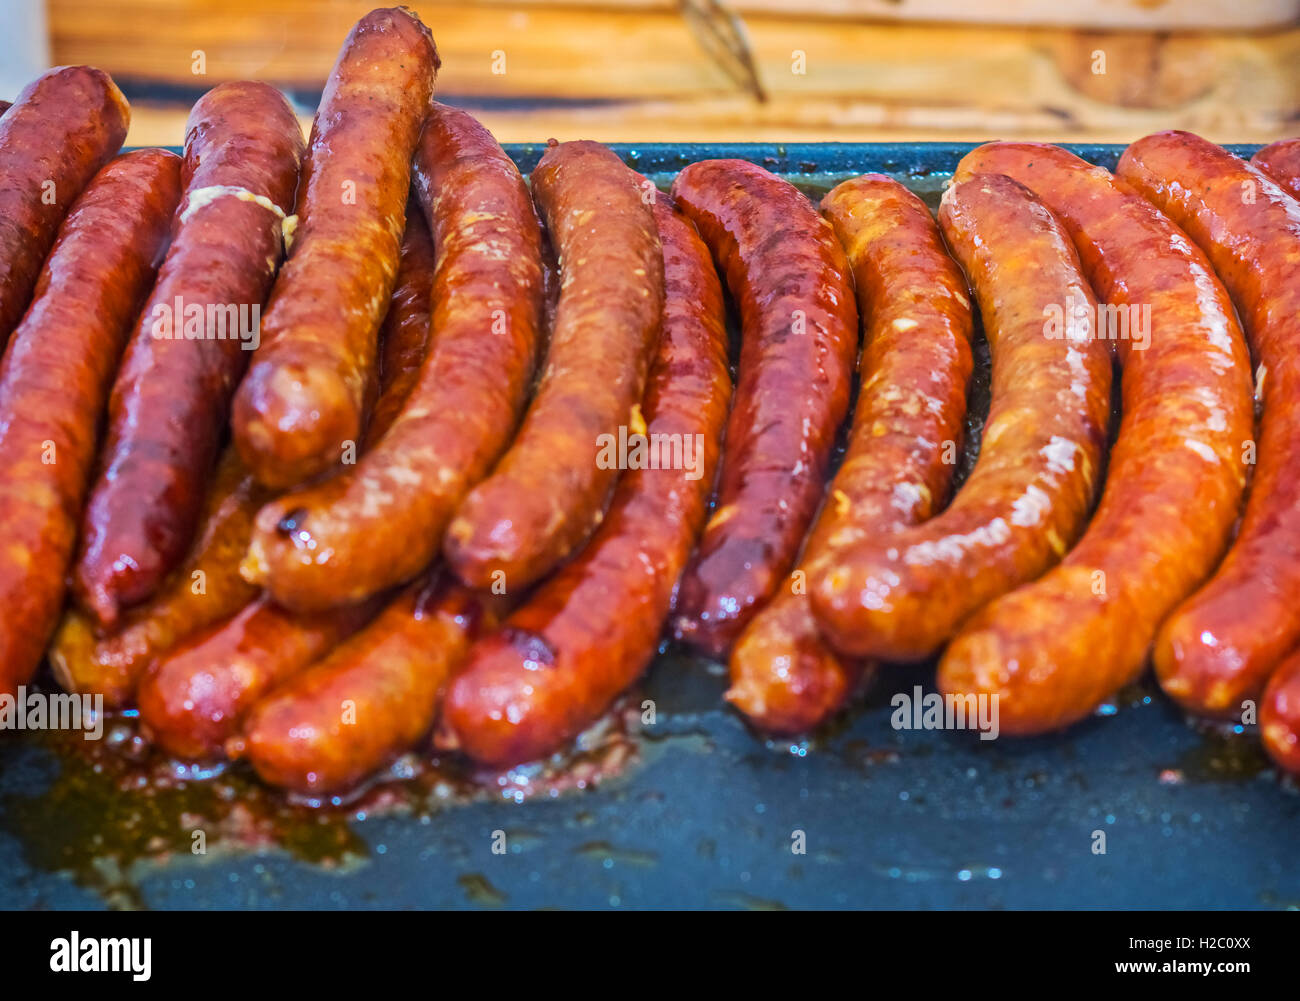 Italie Piémont Turin ' Terra Madre - Salone del Gusto 2016 ' -Slovaquie Sausage Banque D'Images